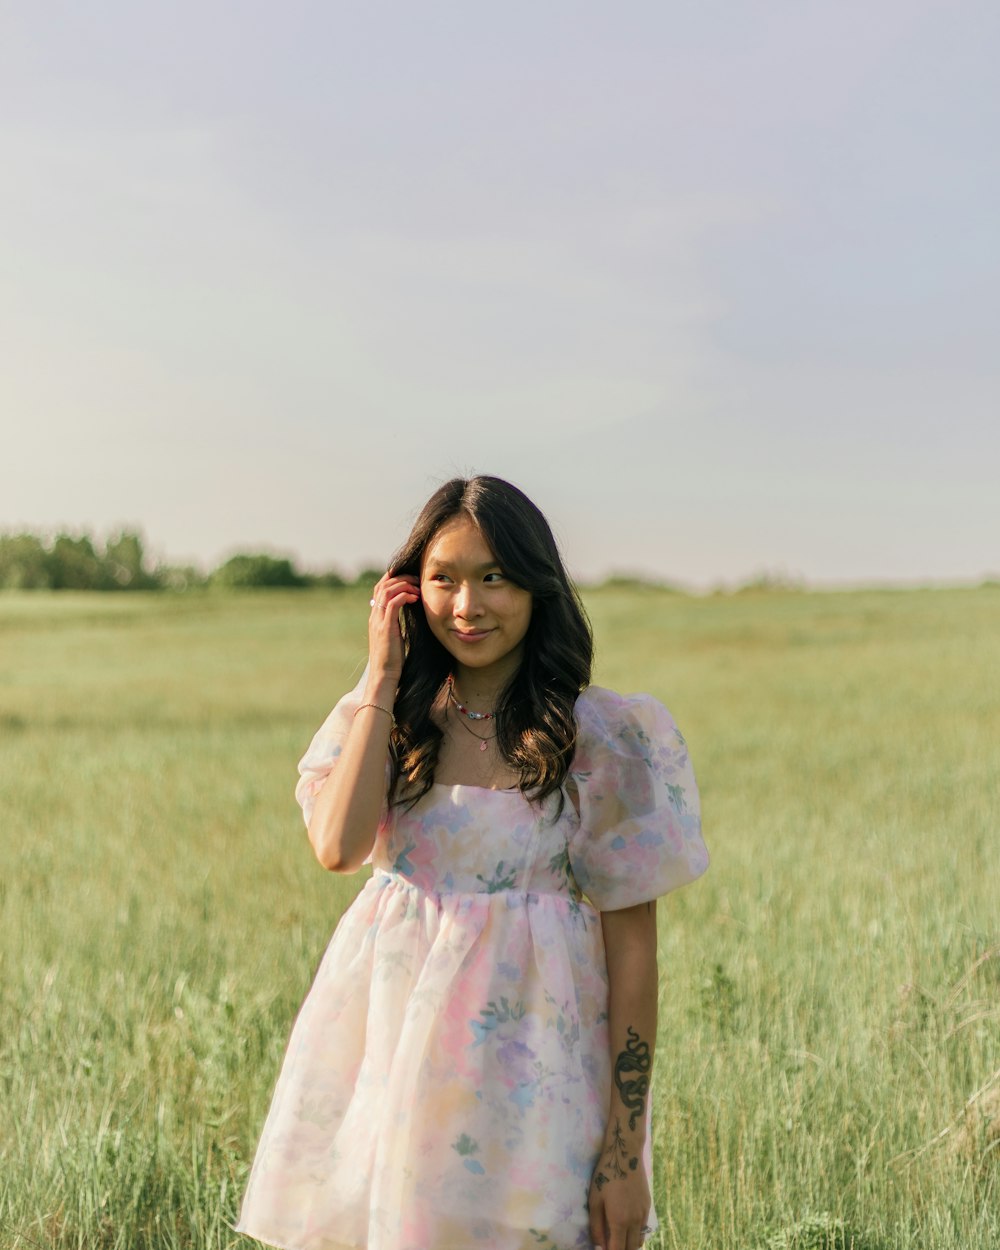 a person in a dress standing in a field